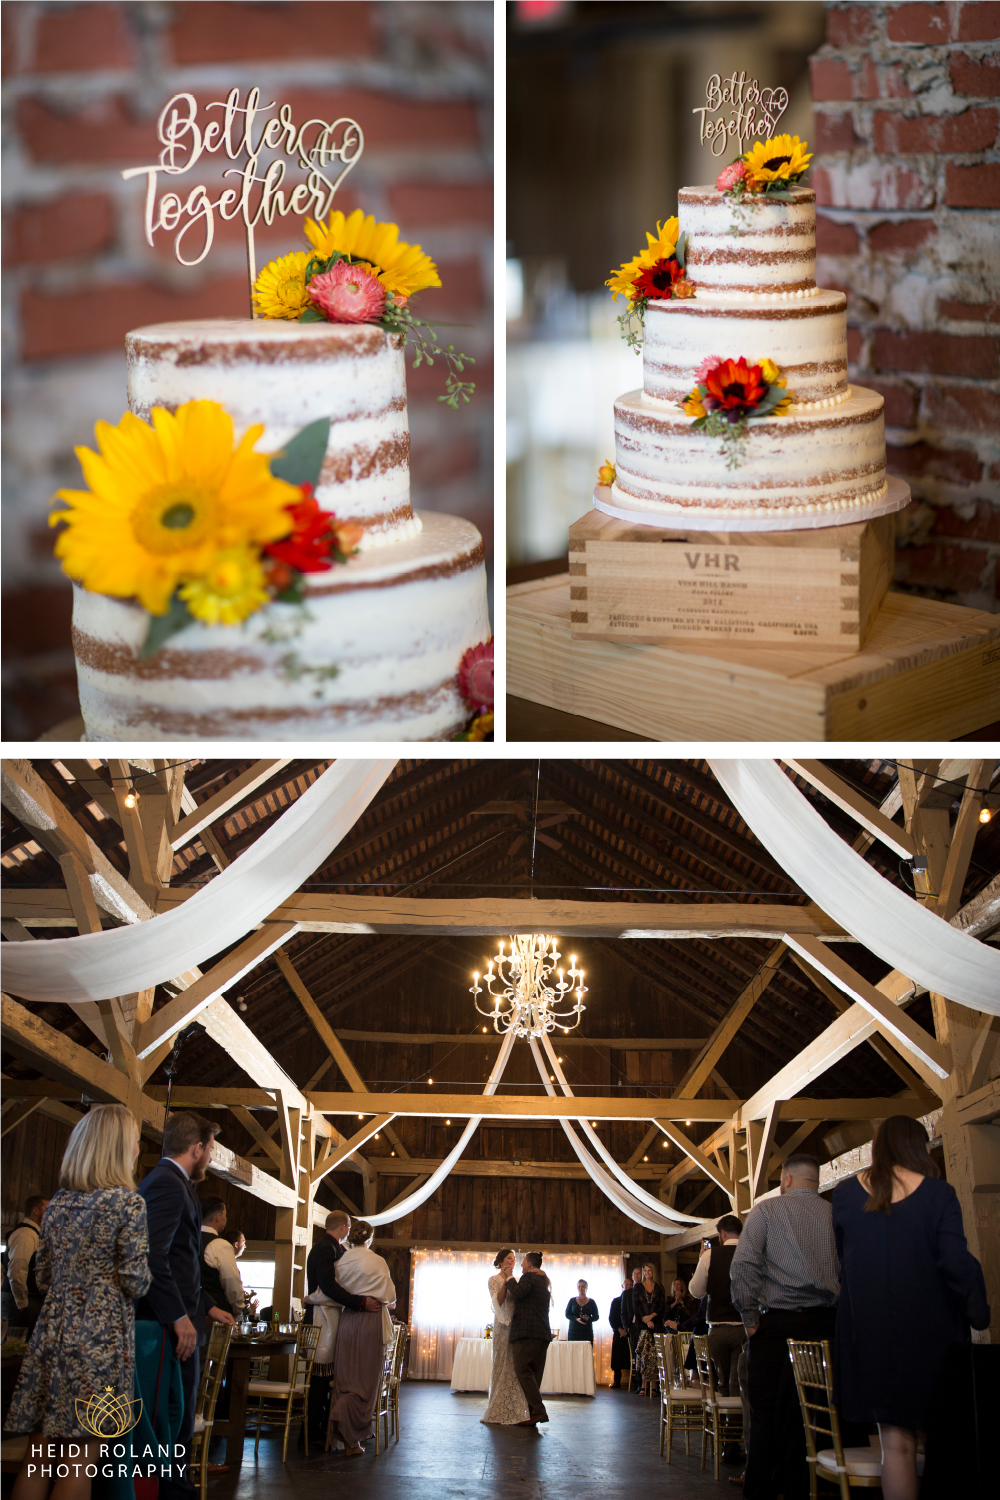 Wedding cake and first dance in barn reception 